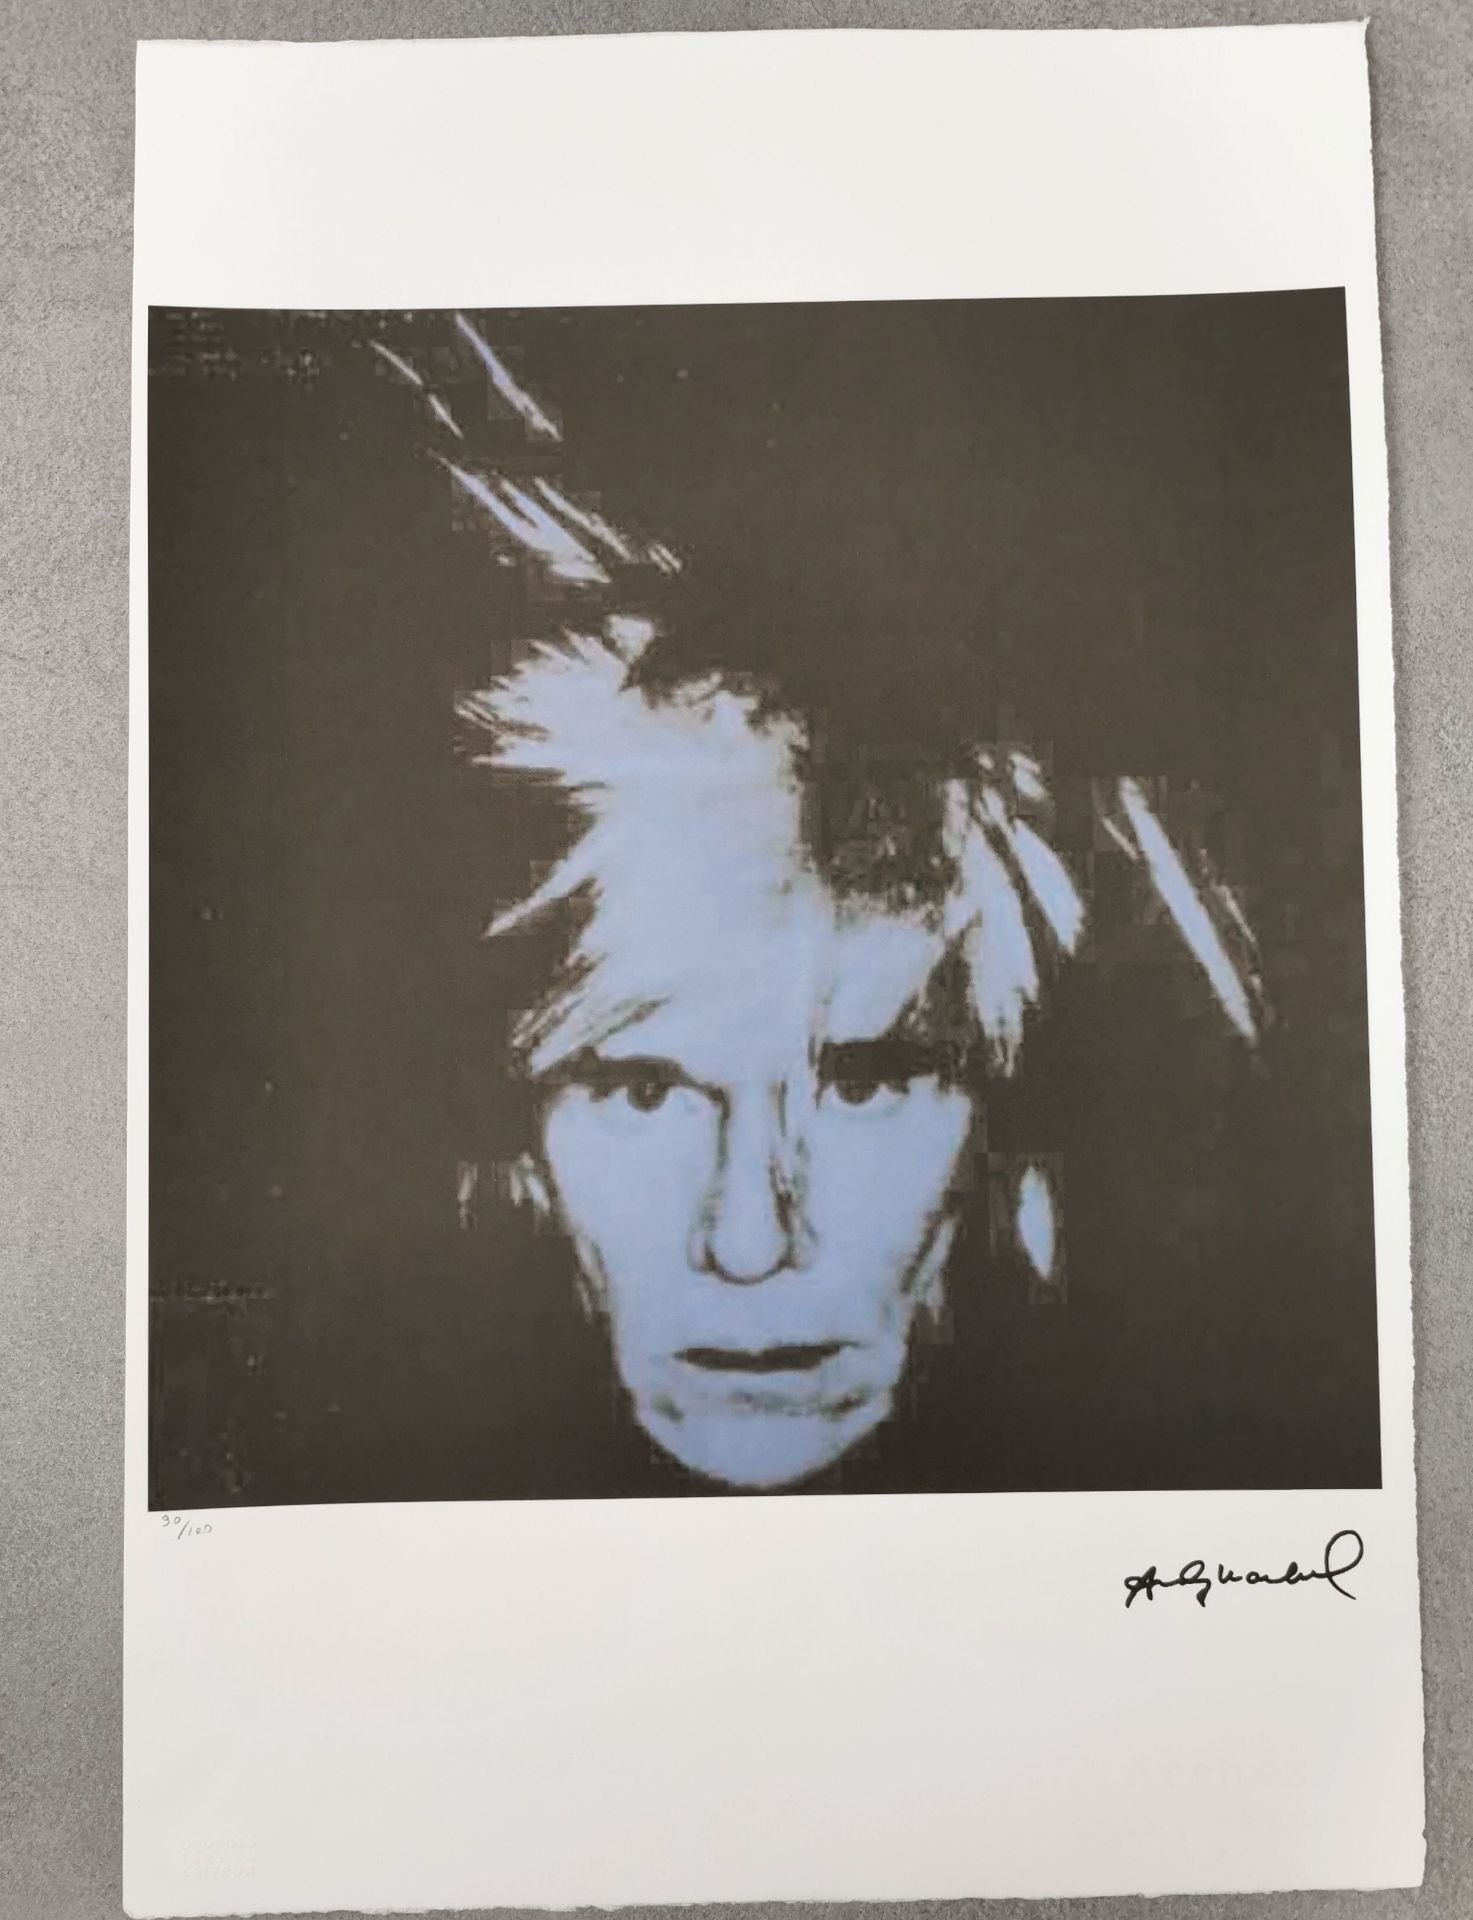 GRAPHICS AFTER ANDY WARHOL